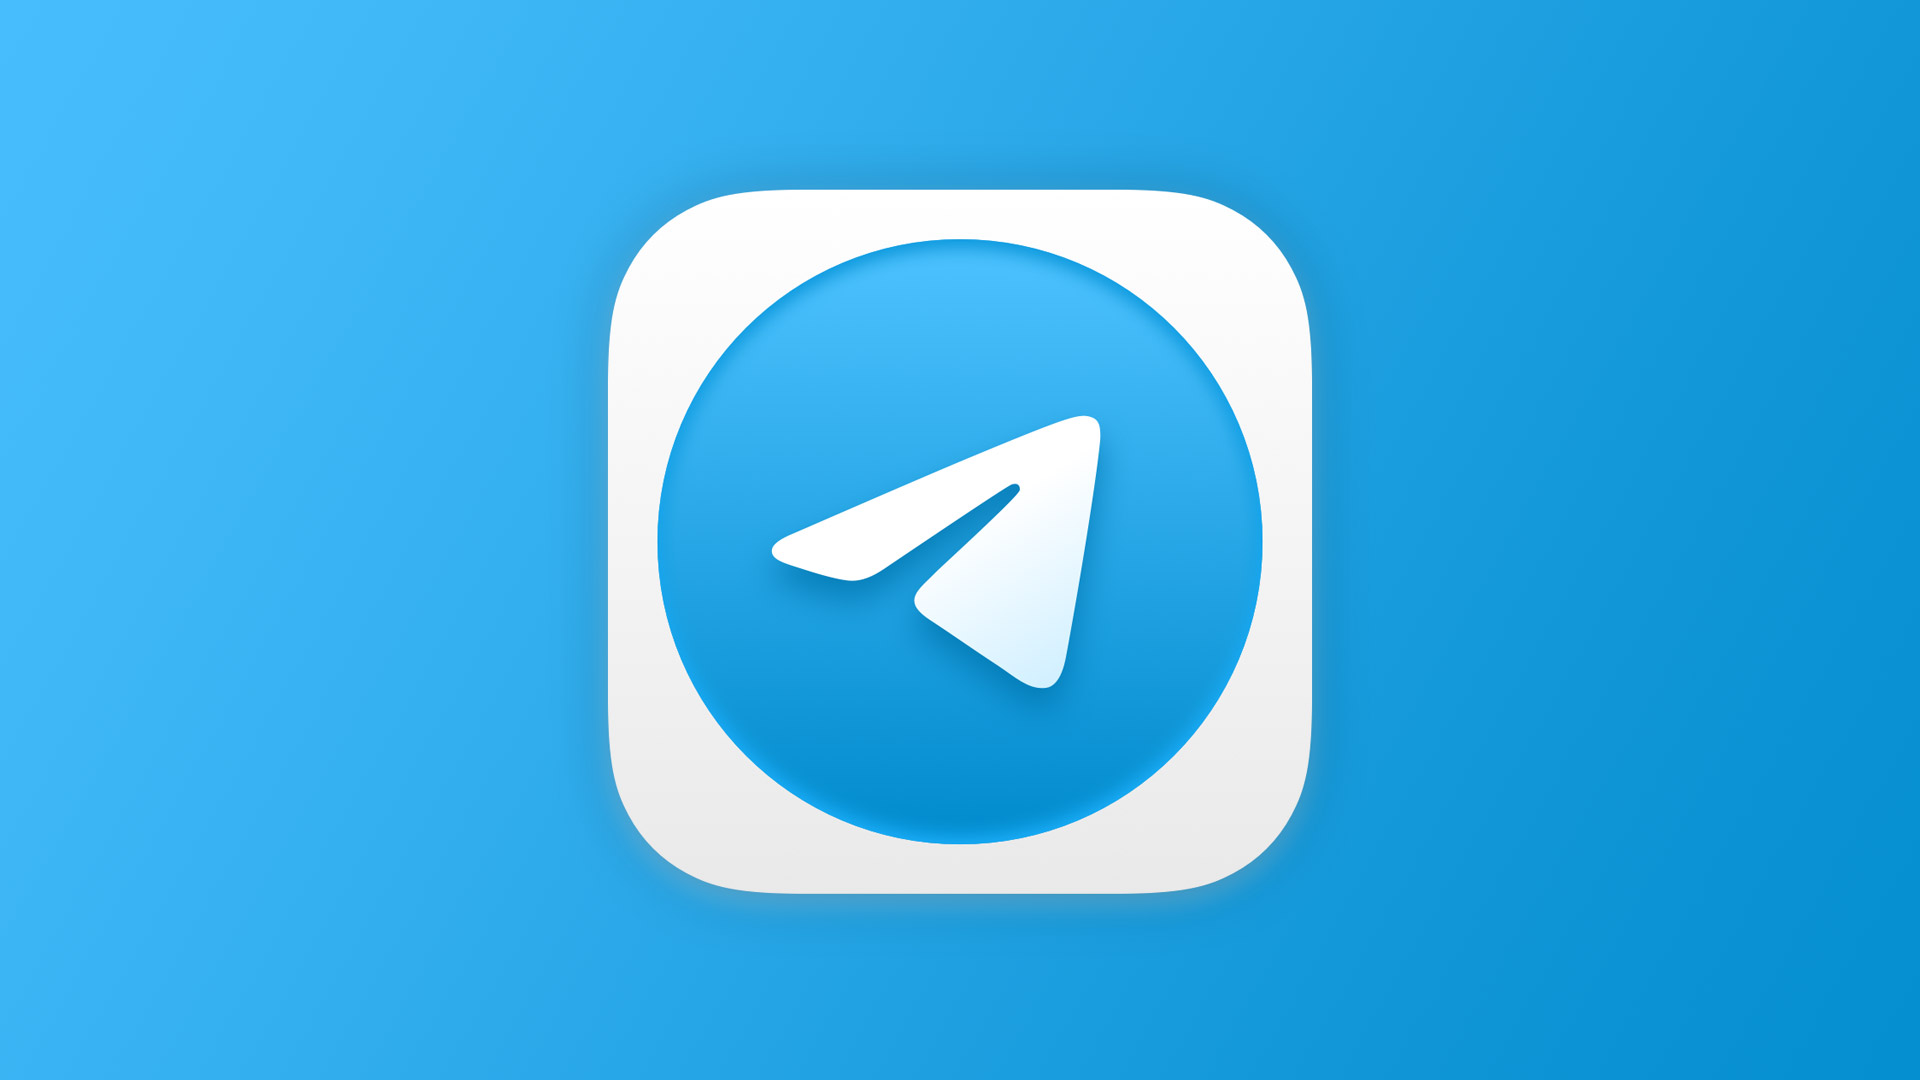 Telegram launches sharable chat folders and more